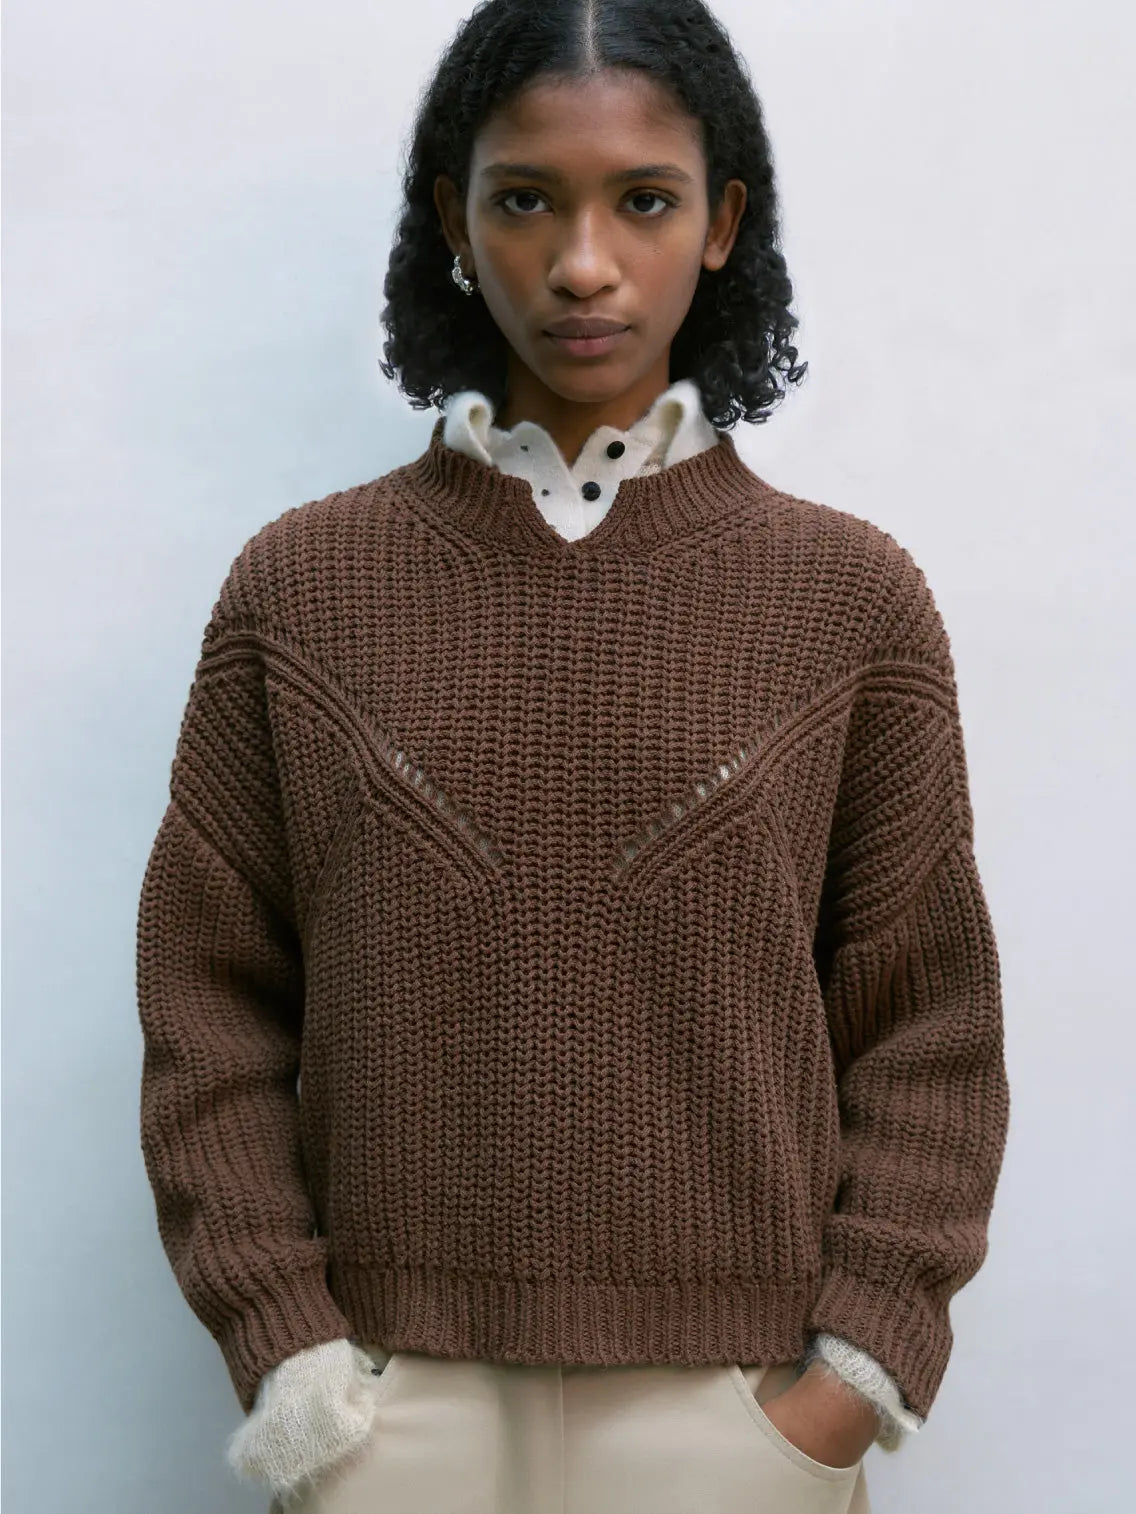 A brown knitted sweater with a round neckline and a relaxed fit. The Cotton Cropped Sweater Madera, available at Bassalstore in Barcelona, features a geometric knit pattern with triangular openwork details on the front and ribbed cuffs, hem, and neckline. The texture appears thick and cozy, ideal for cooler weather. This exquisite piece is from the brand Cordera.